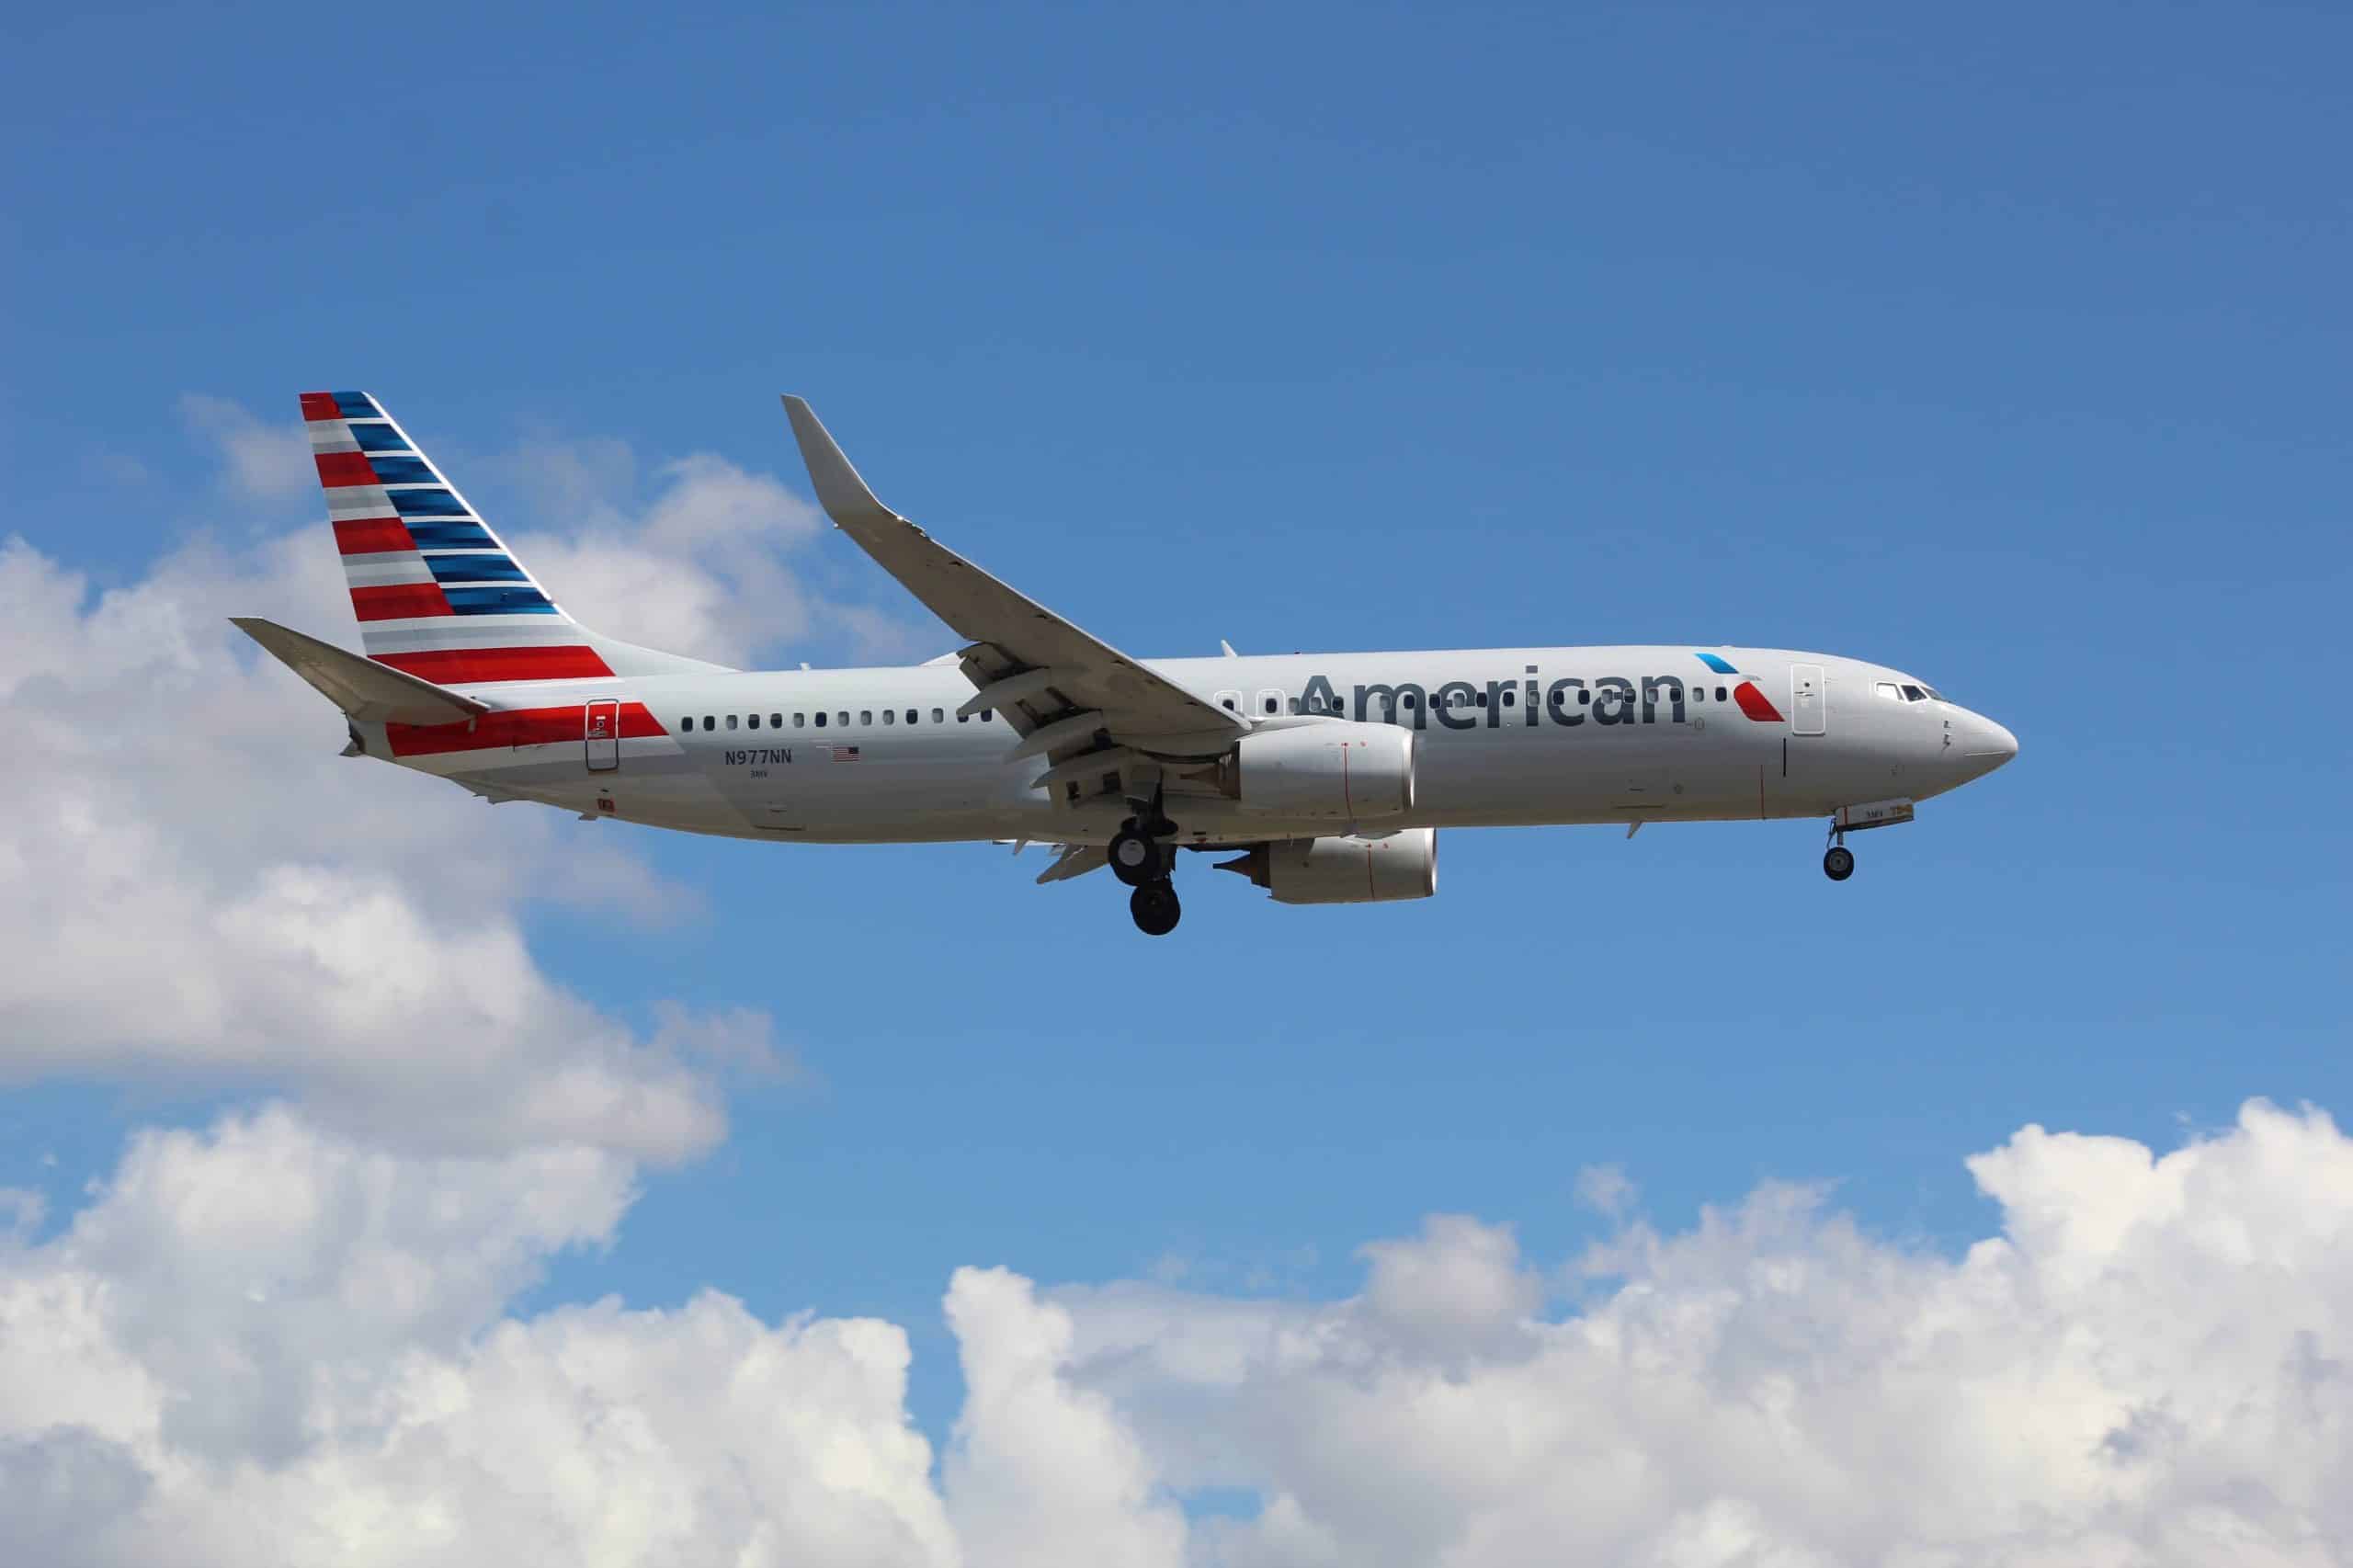 American-Airlines-Top-Flight-Attendant-Salary